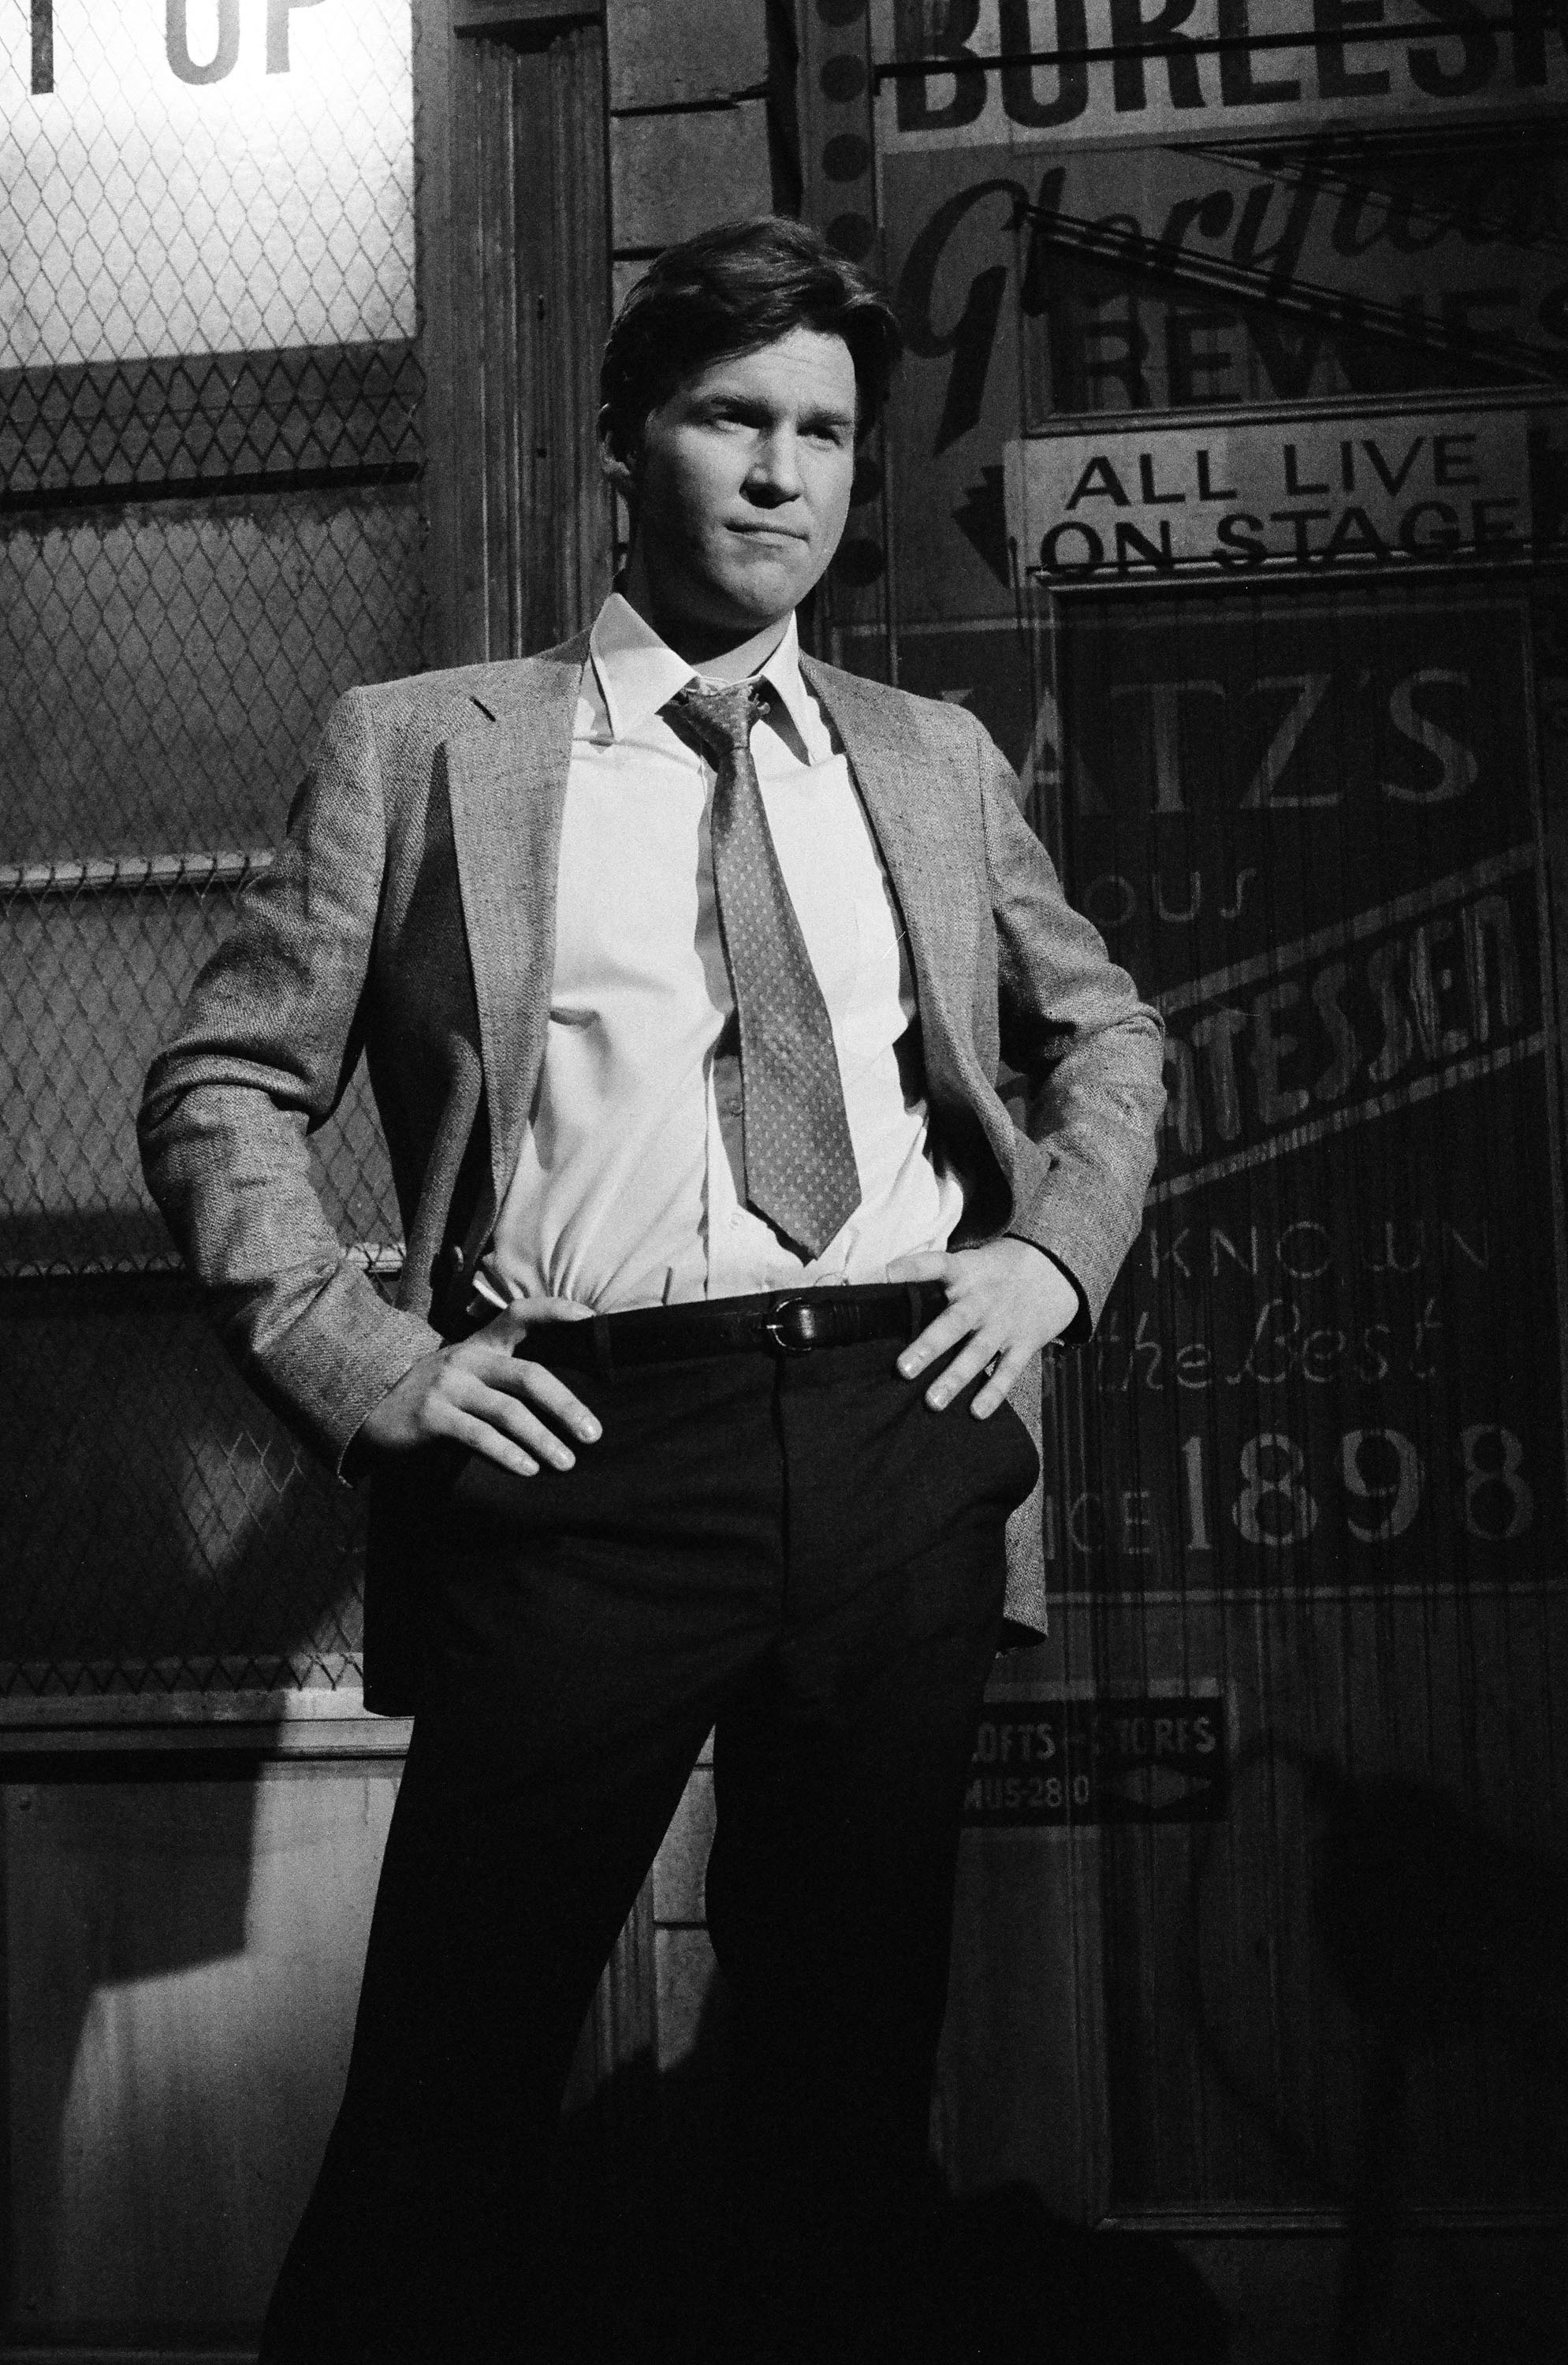 The movie star on "Saturday Night Live," on February 26, 1983. | Source: Getty Images